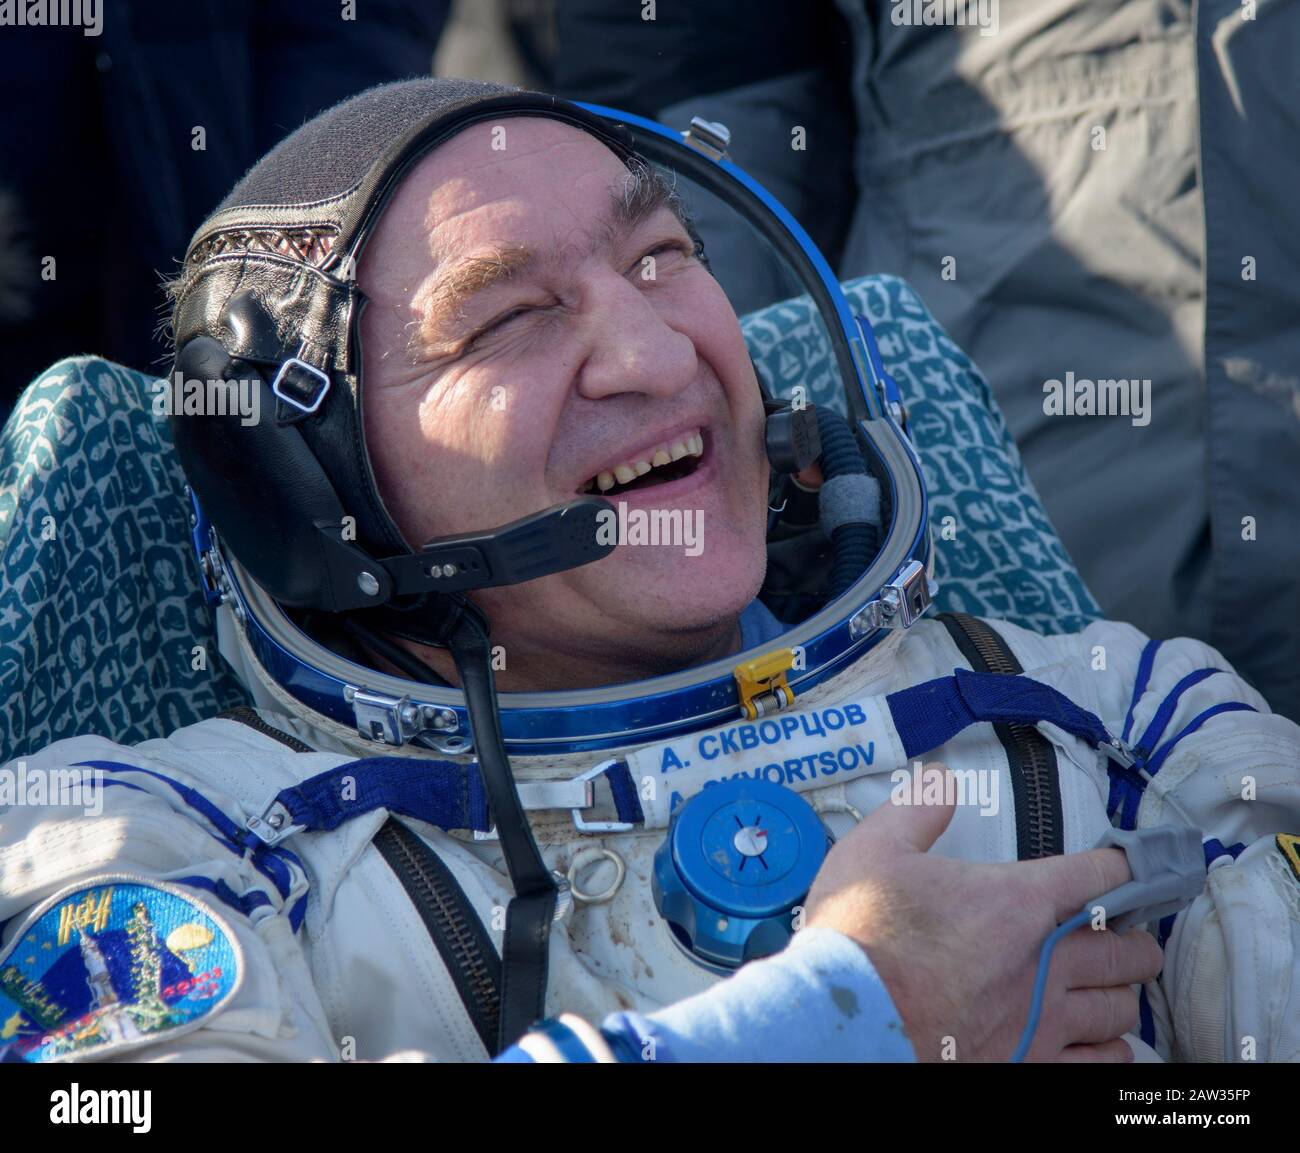 Roscosmos cosmonaut Alexander Skvortsov is seen outside the Soyuz MS-13 spacecraft after he landed with NASA astronaut Christina Koch and ESA astronaut Luca Parmitano in their Soyuz MS-13 capsule in a remote area near the town of Zhezkazgan, Kazakhstan on Thursday, Feb. 6, 2020. Koch returned to Earth after logging 328 days in space --- the longest spaceflight in history by a woman --- as a member of Expeditions 59-60-61 on the International Space Station. Skvortsov and Parmitano returned after 201 days in space where they served as Expedition 60-61 crew members onboard the station. Mandatory Stock Photo